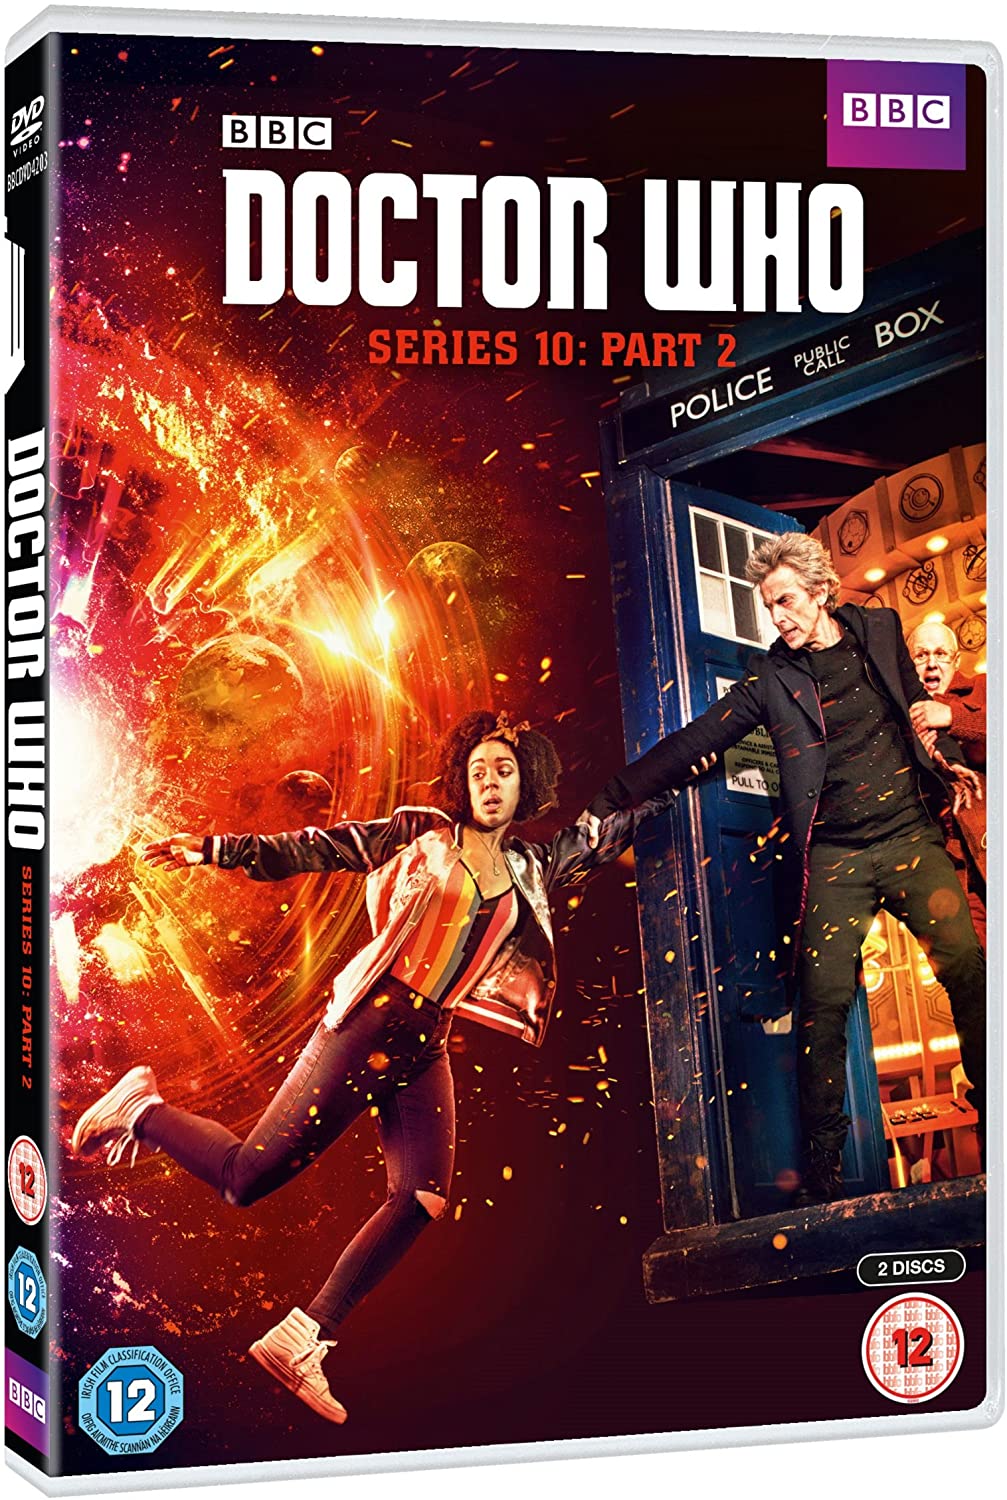 Doctor Who - Series 10 Part 2 [DVD] [2017]